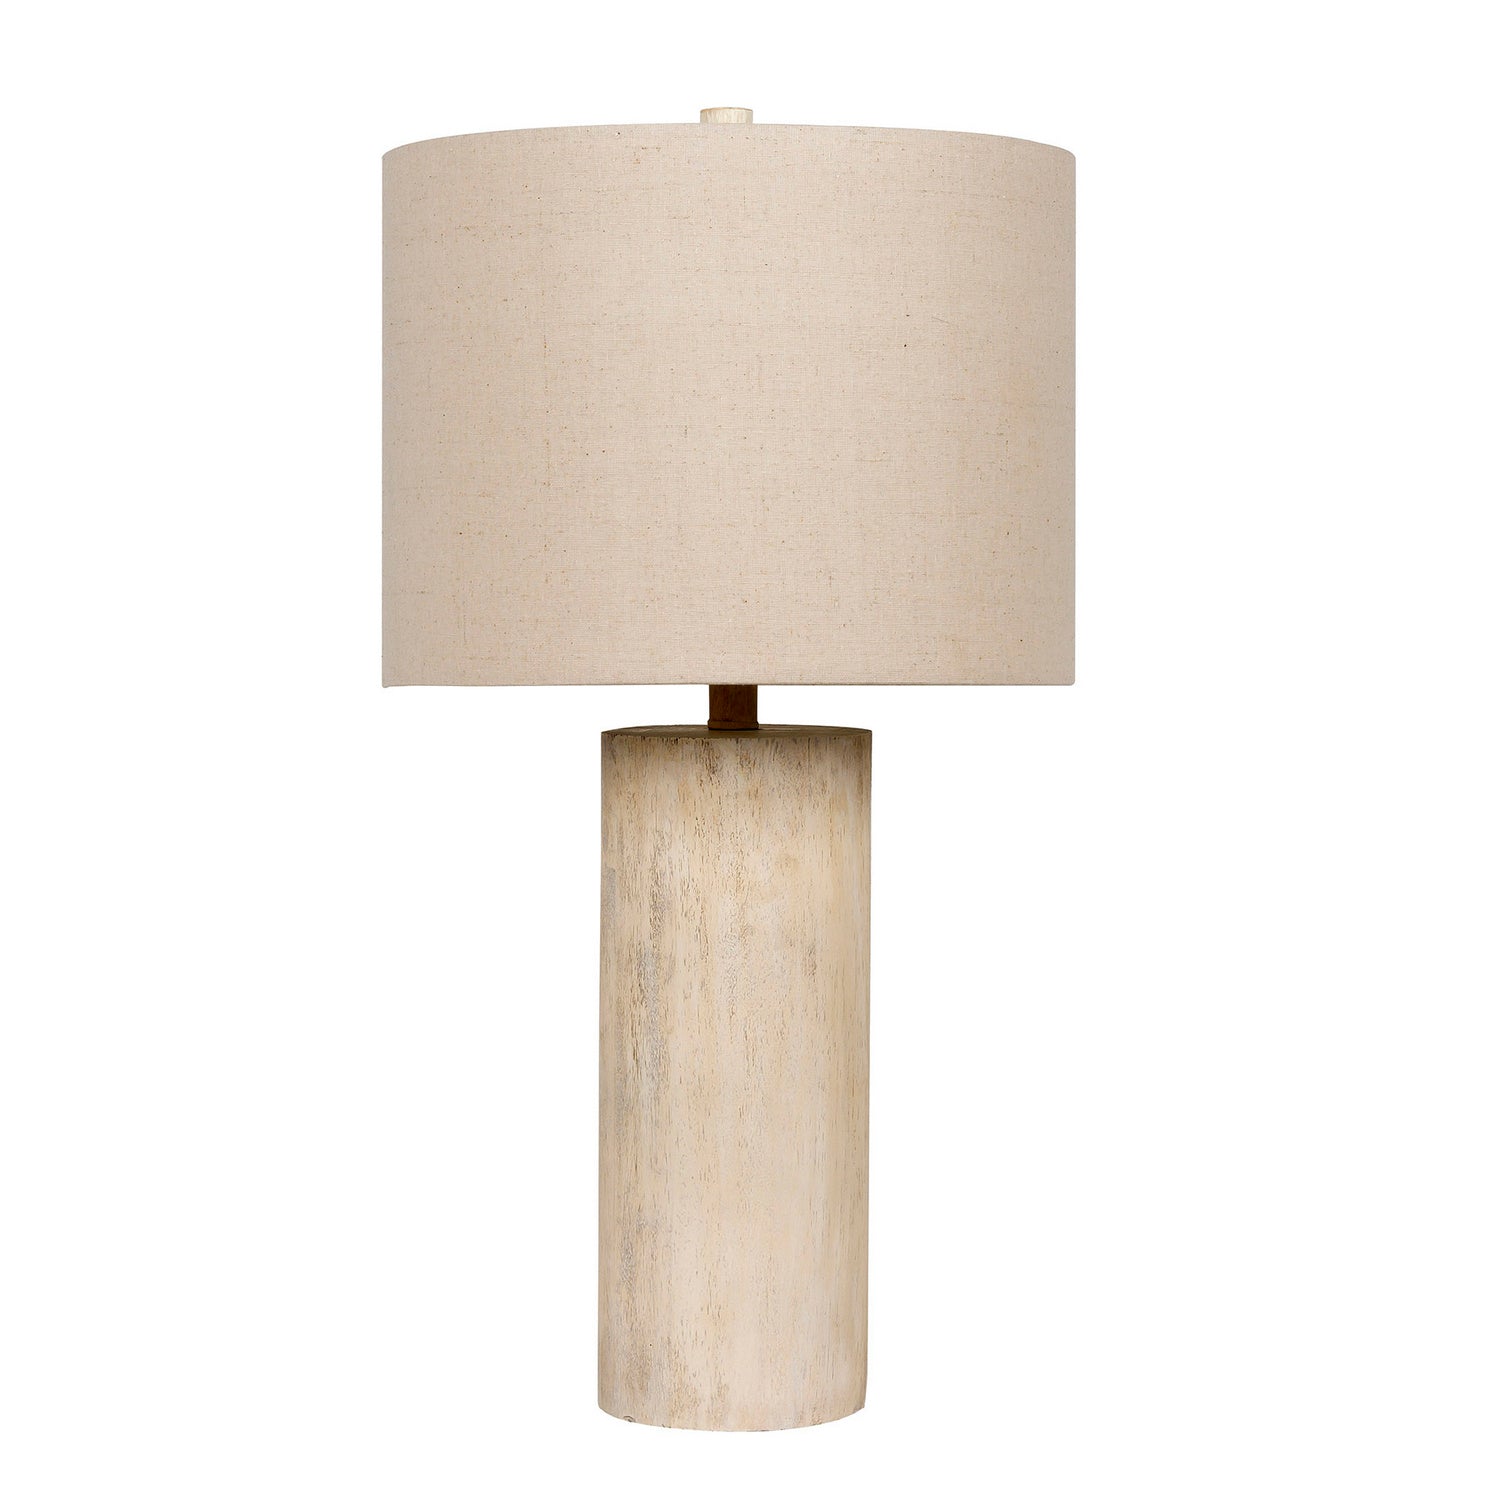 Craftmade Lighting 86200  Table Lamp Lamp Cottage White